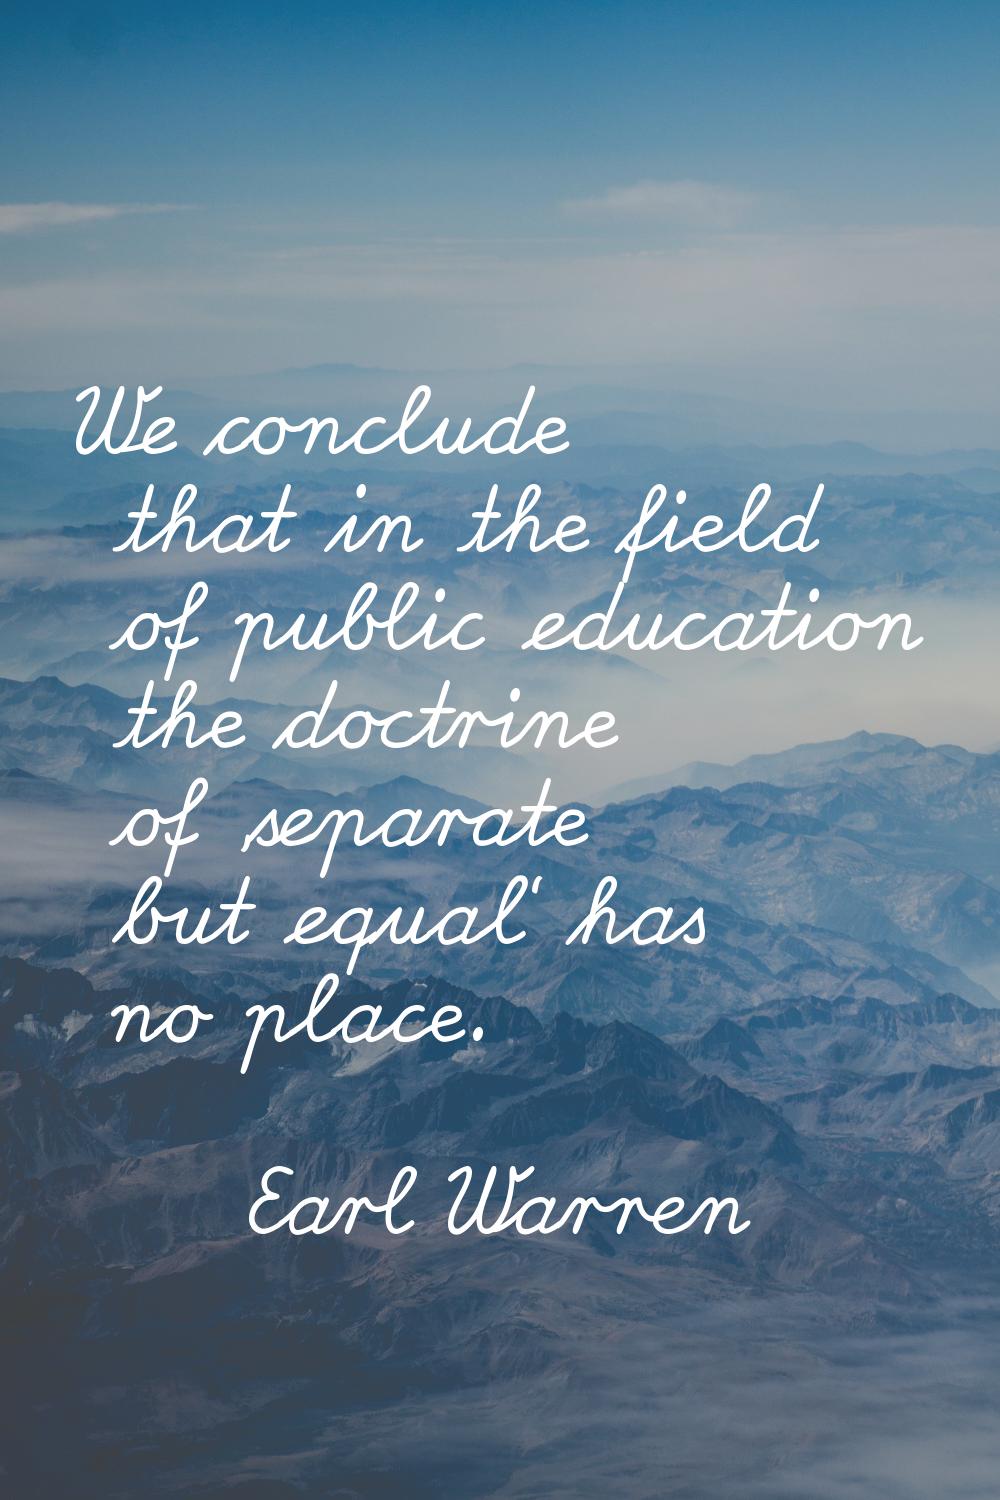 We conclude that in the field of public education the doctrine of 'separate but equal' has no place